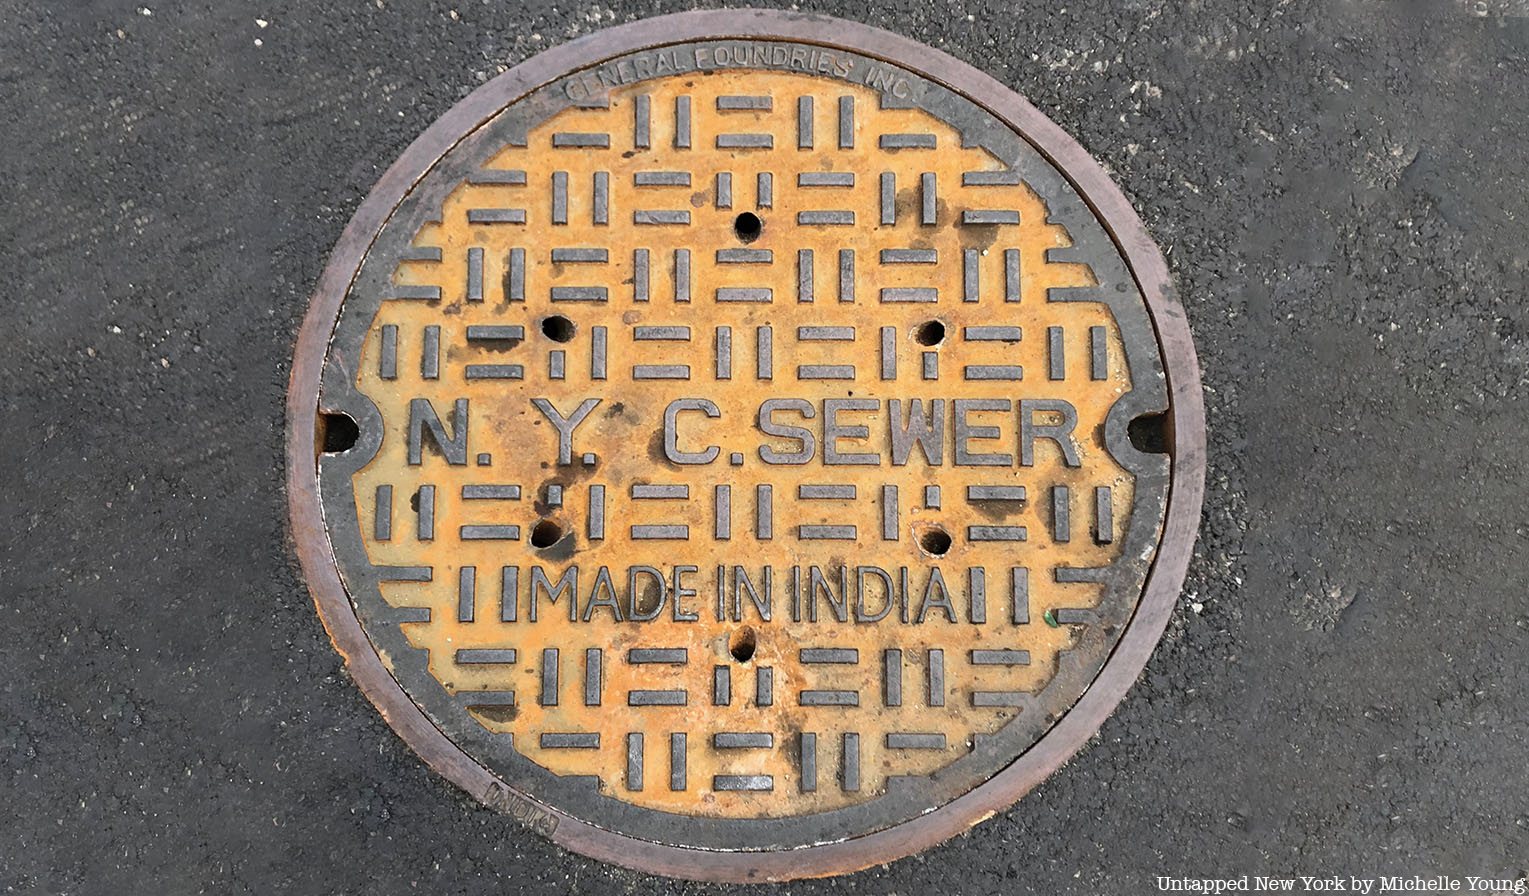 NYC Sewer Manhole Cover